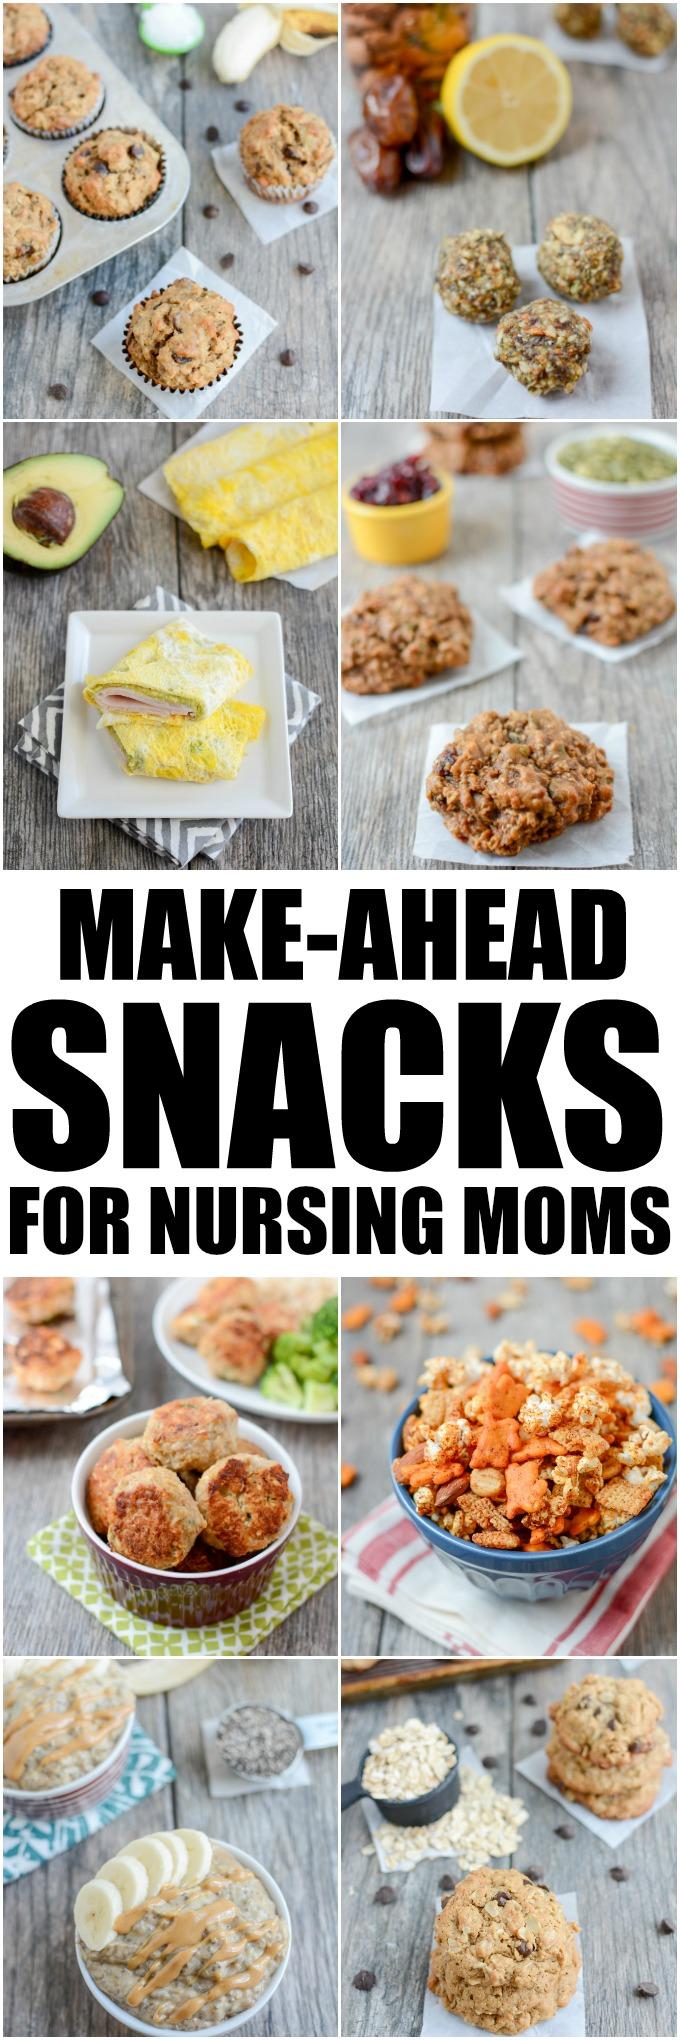 These Make-Ahead Snacks For Breastfeeding Moms are easy, healthy recipes to help keep your body fueled and energized while nursing.